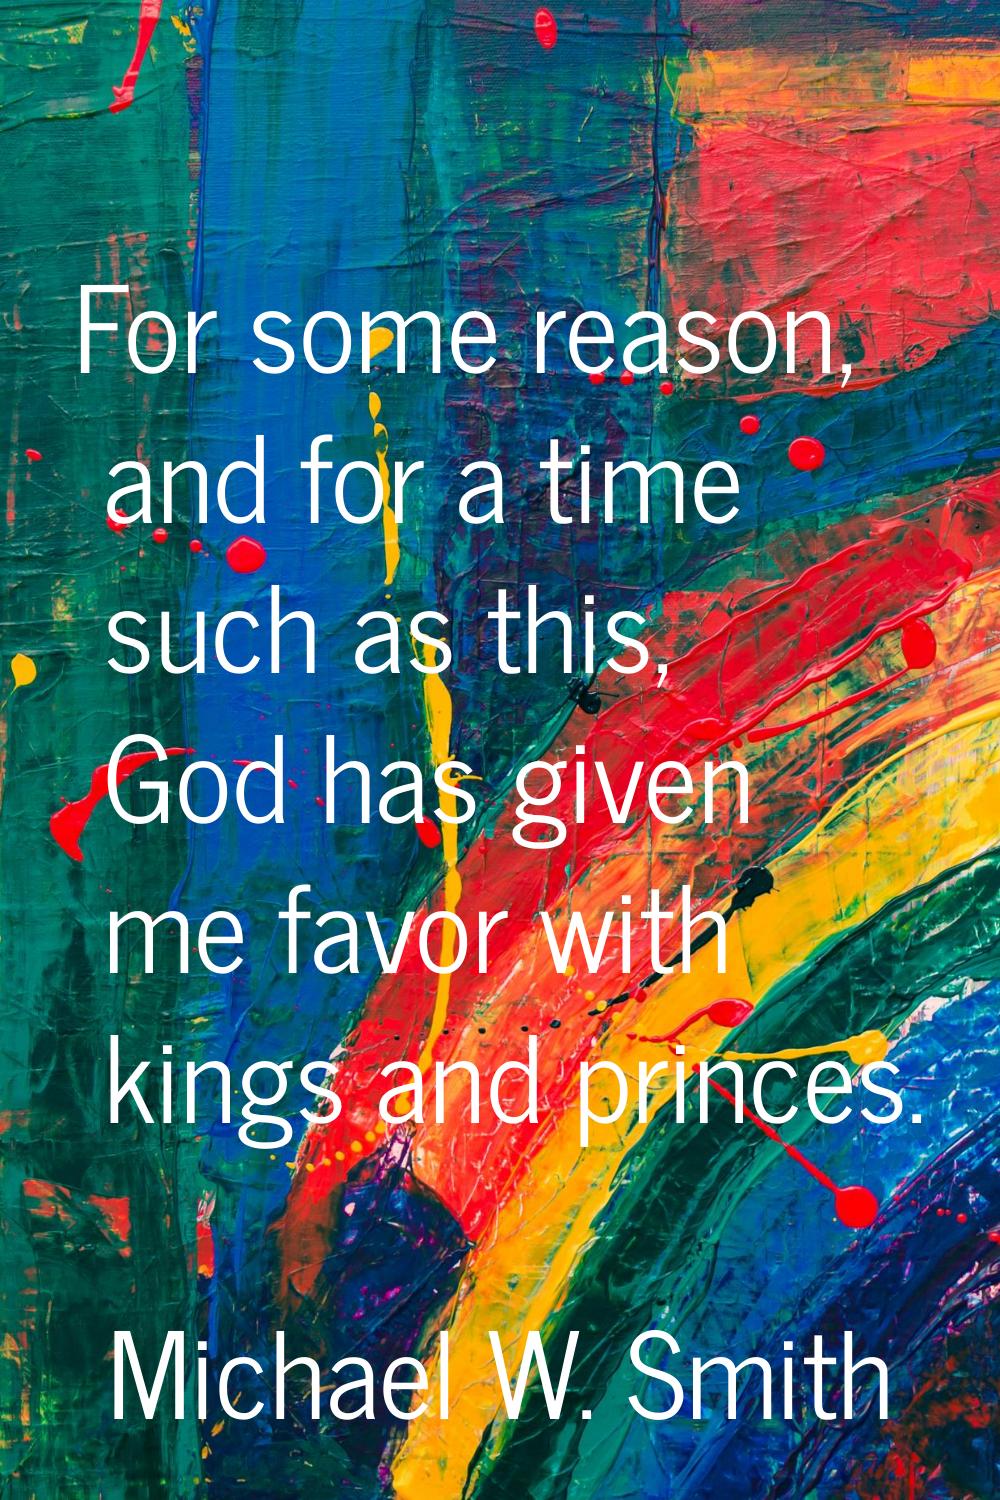 For some reason, and for a time such as this, God has given me favor with kings and princes.